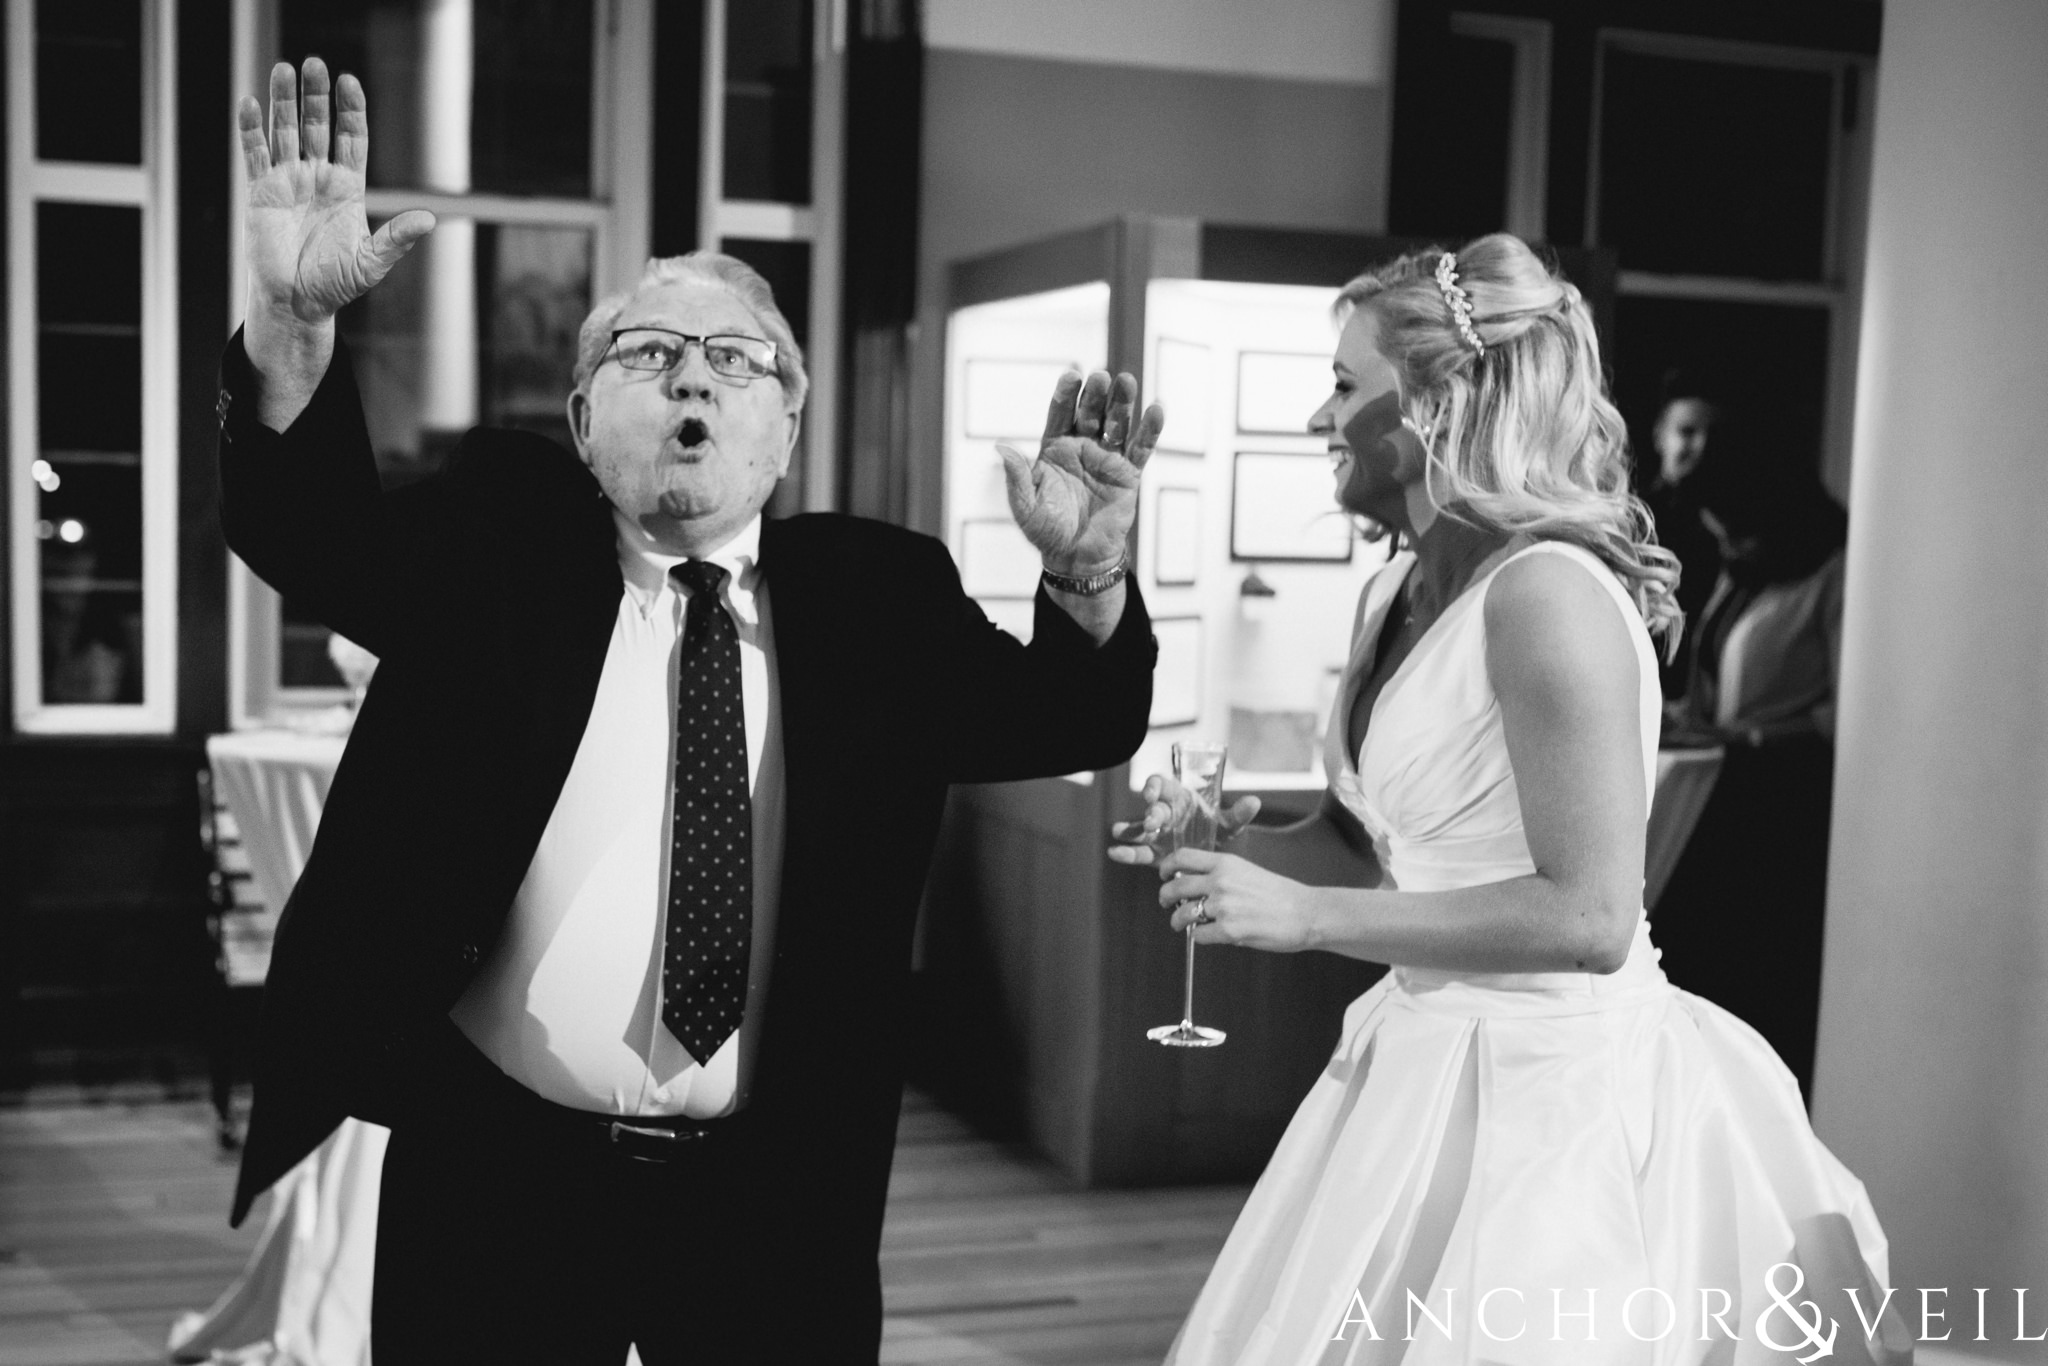 dancing with grandpa during their Alabama Museum of Natural History Wedding